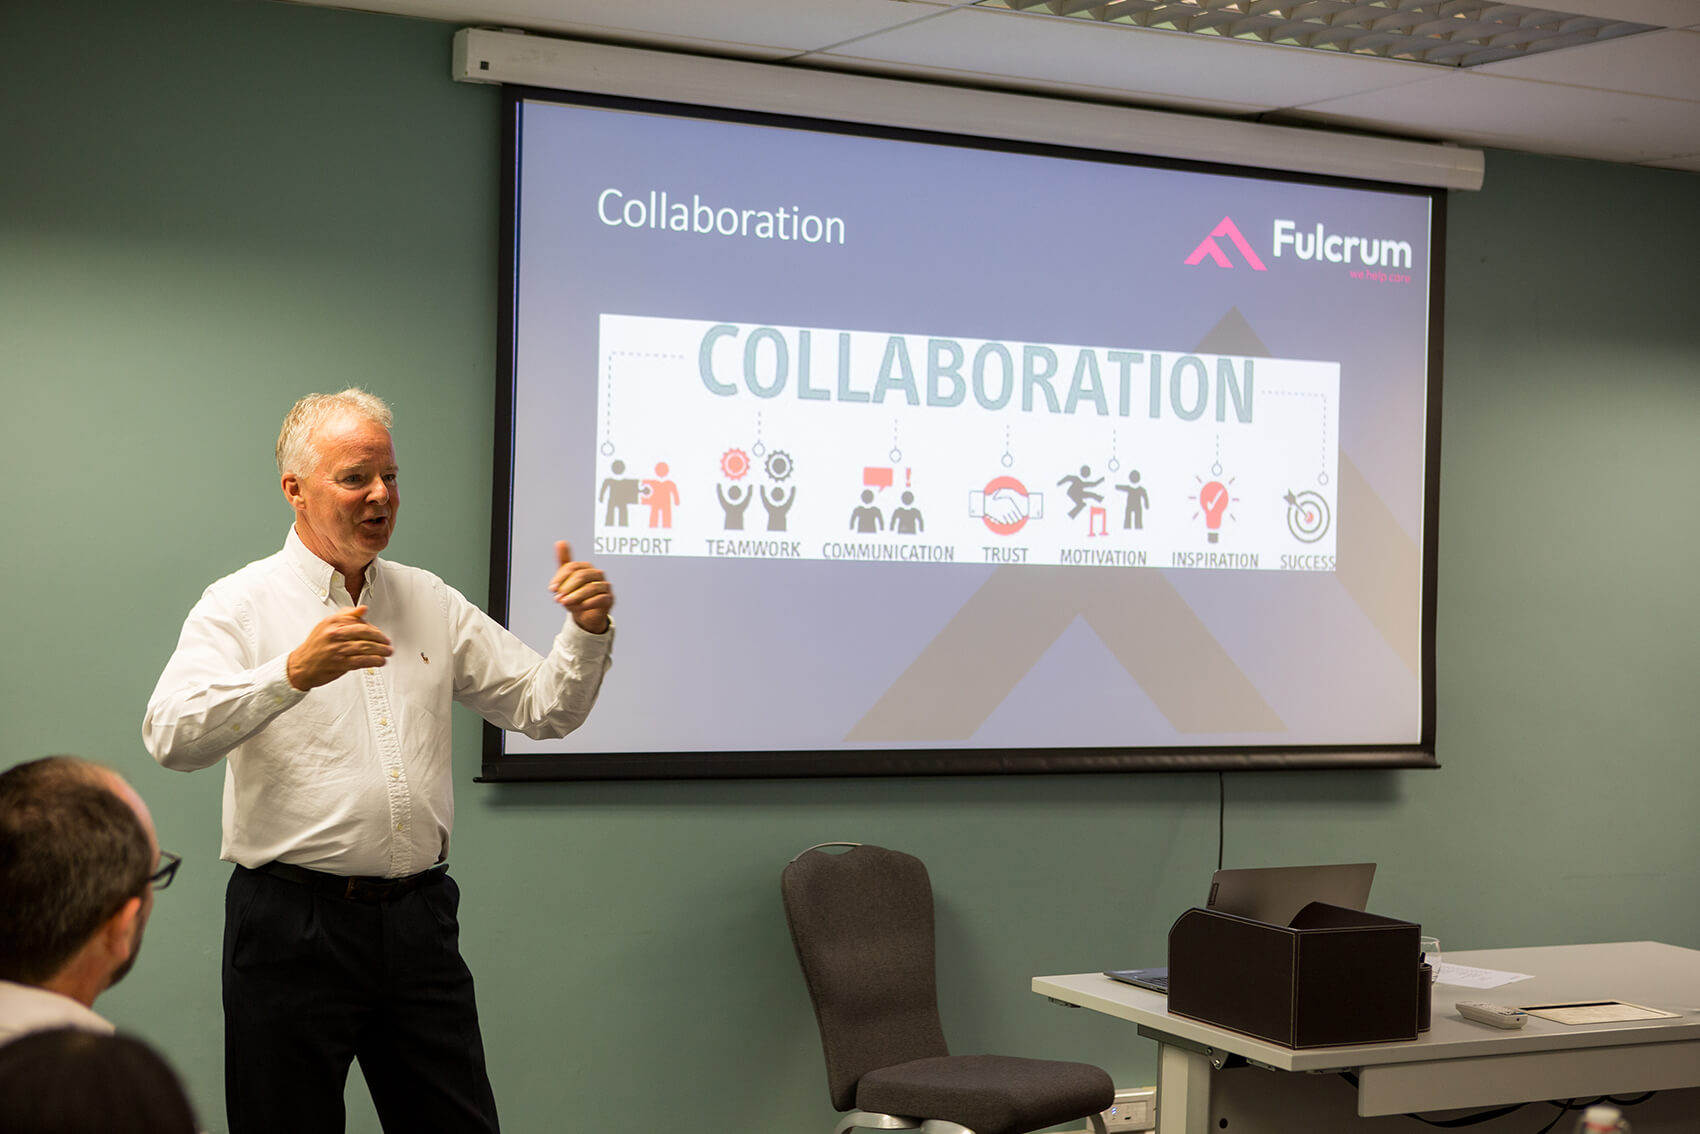 A man giving a presentation about collaboration